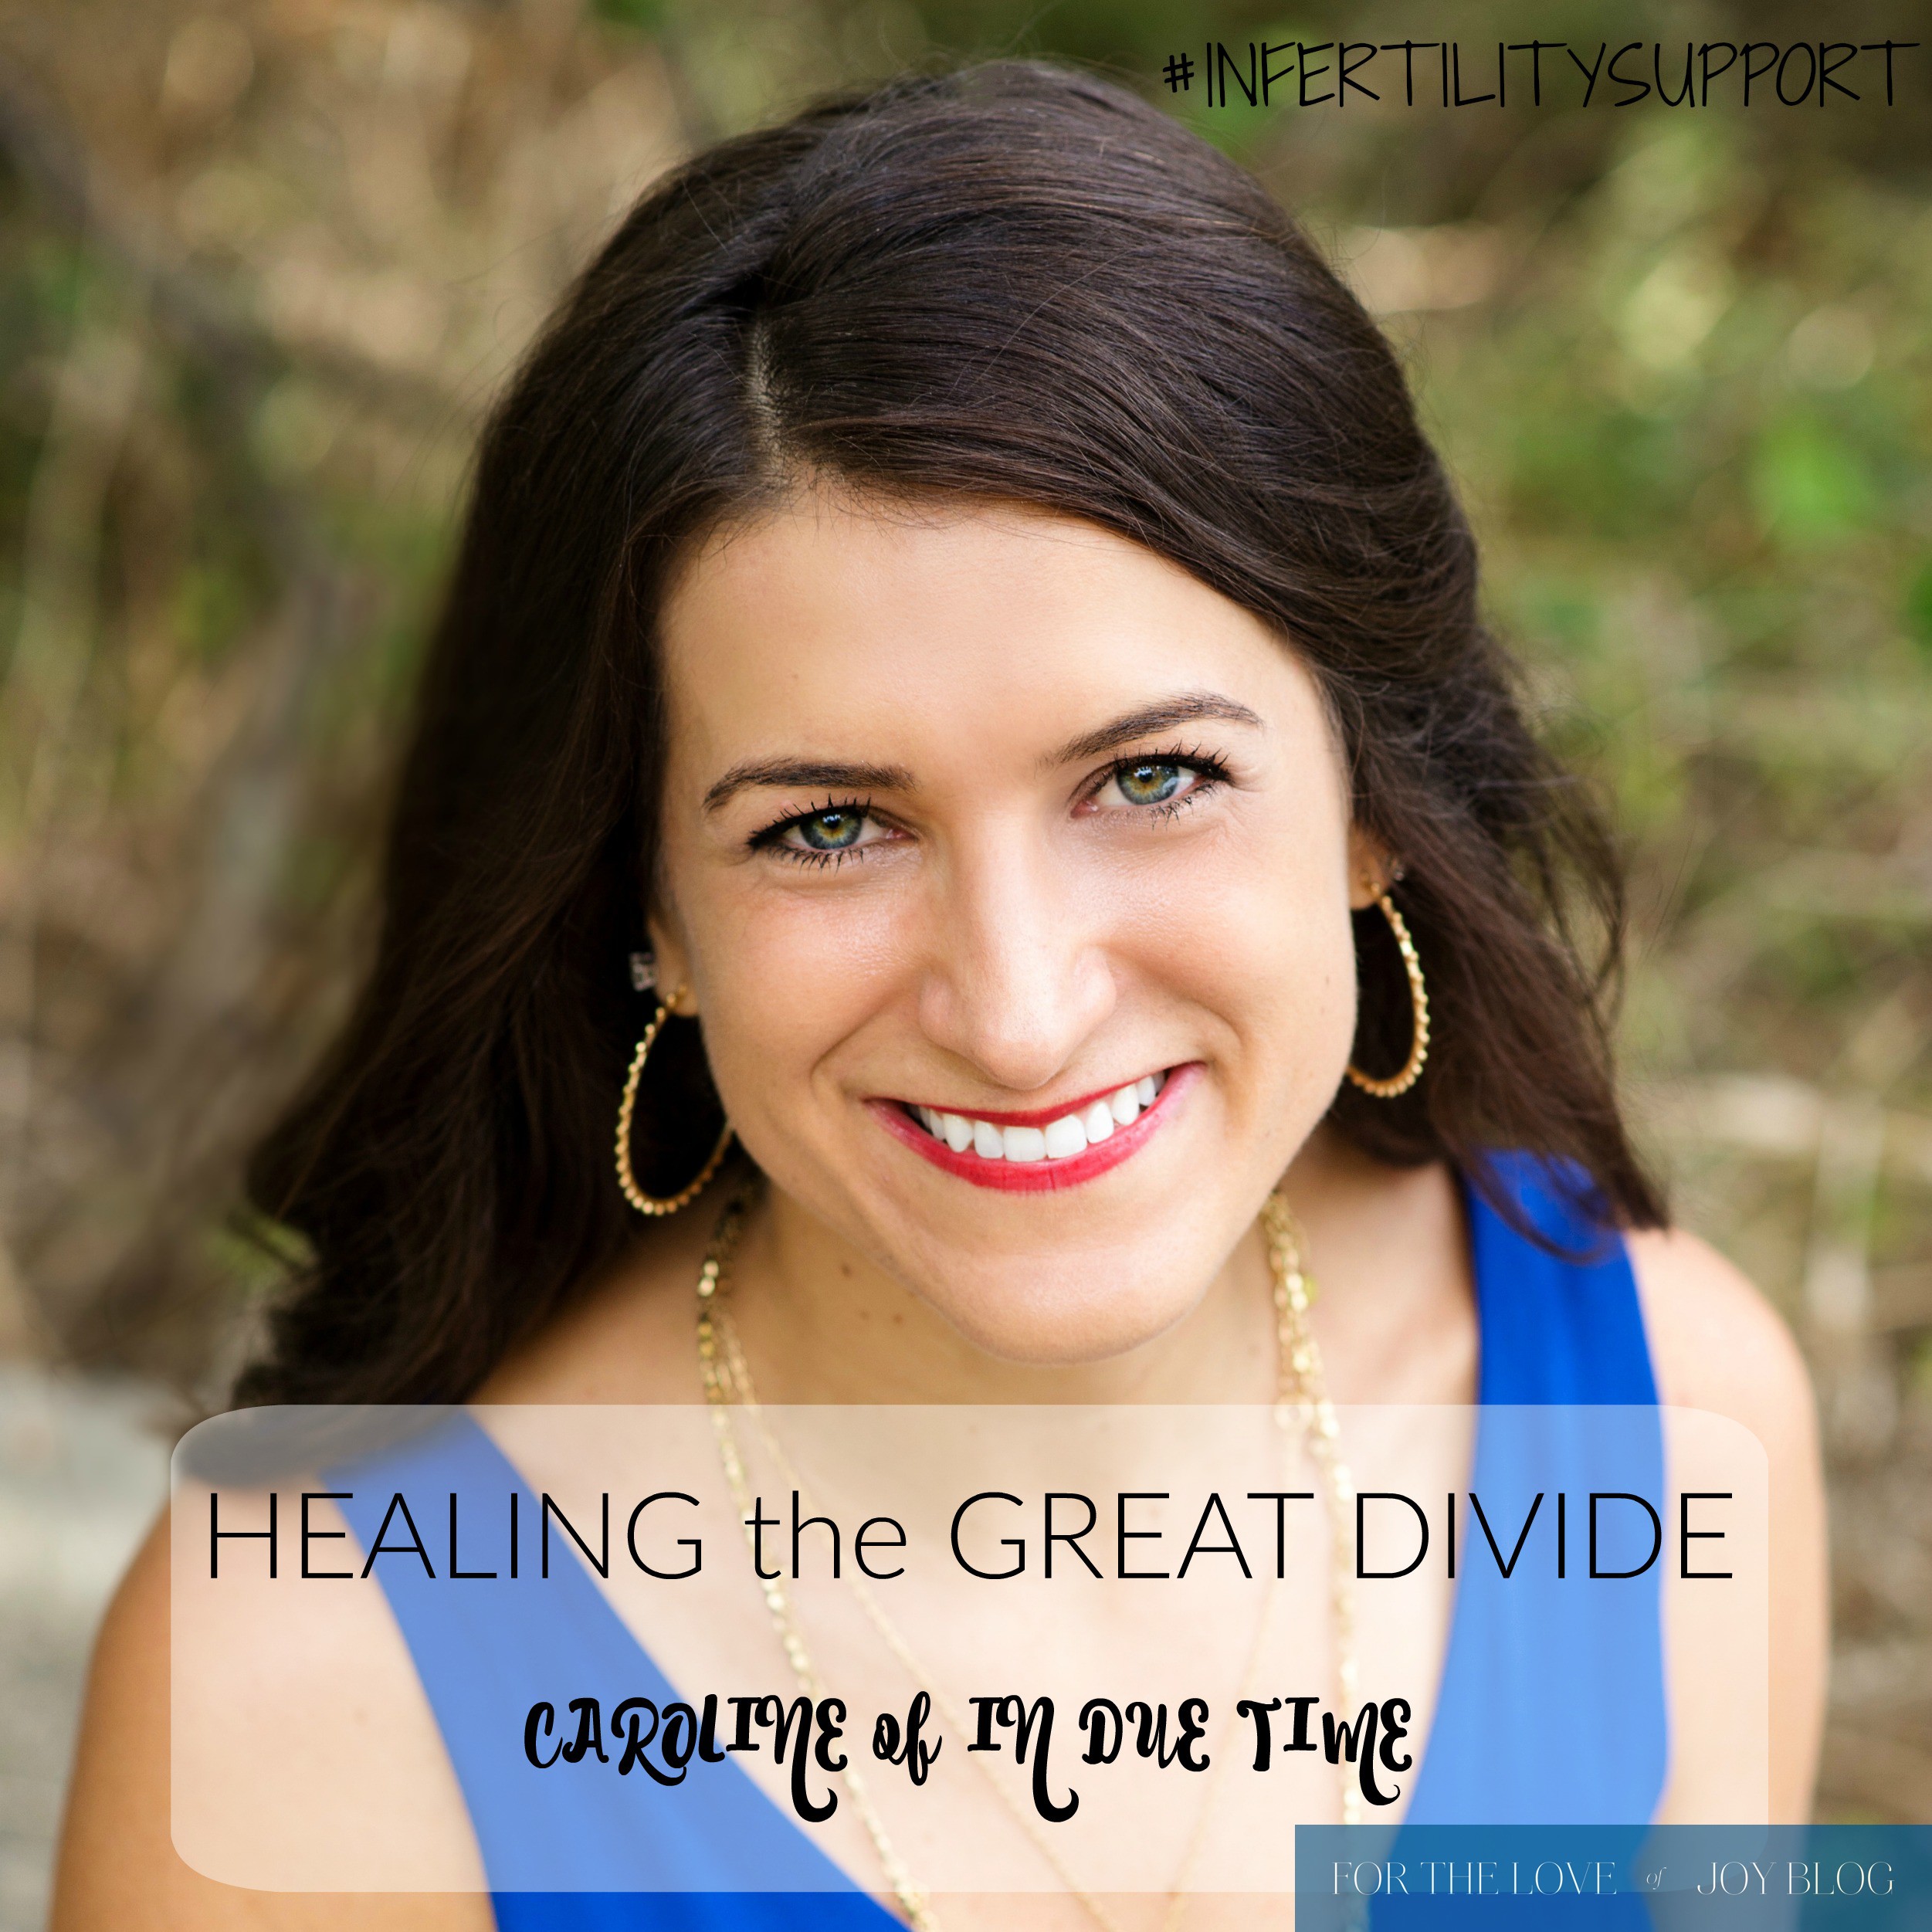 Healing the Great Divide: Caroline of In Due Time